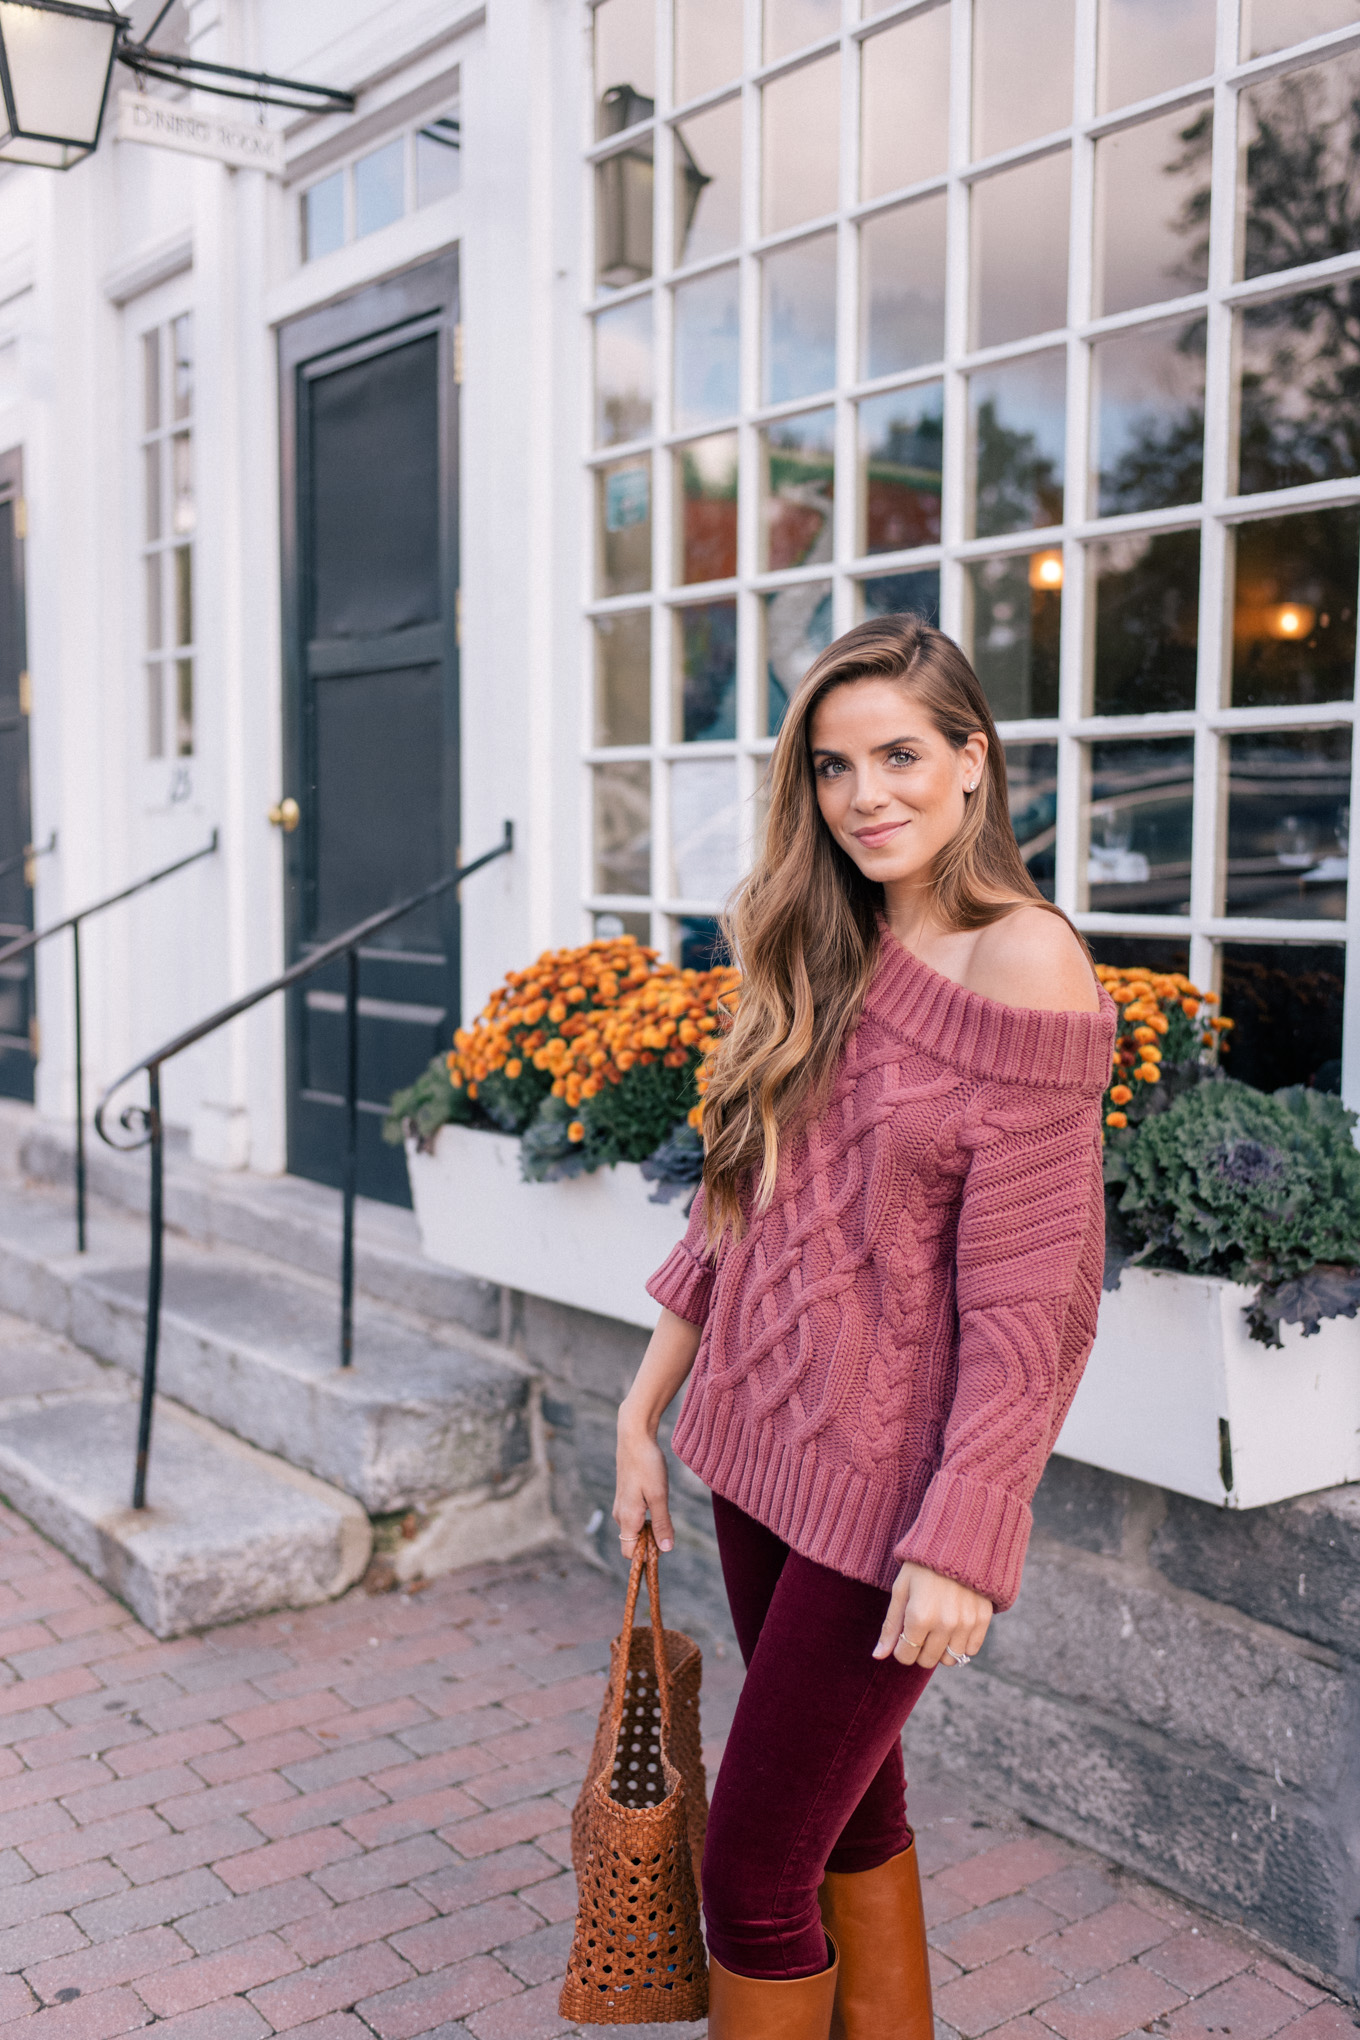 gmg-new-england-fall-style-1009110